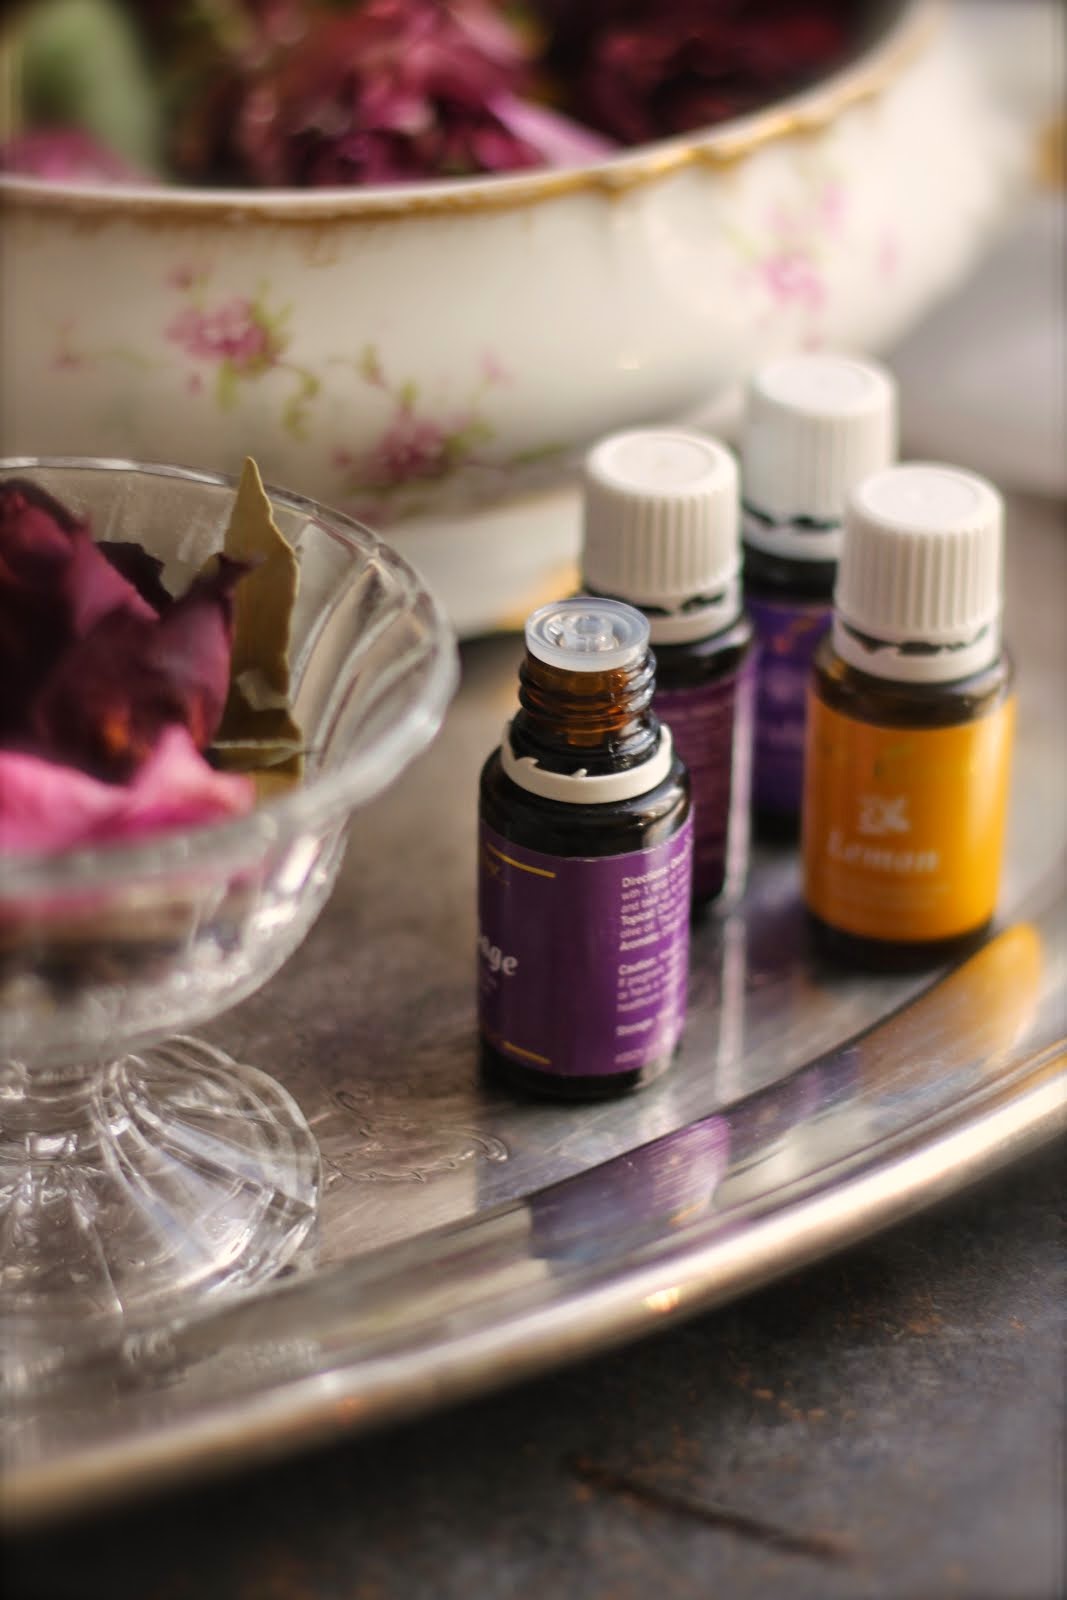 Learn More about Essential Oils